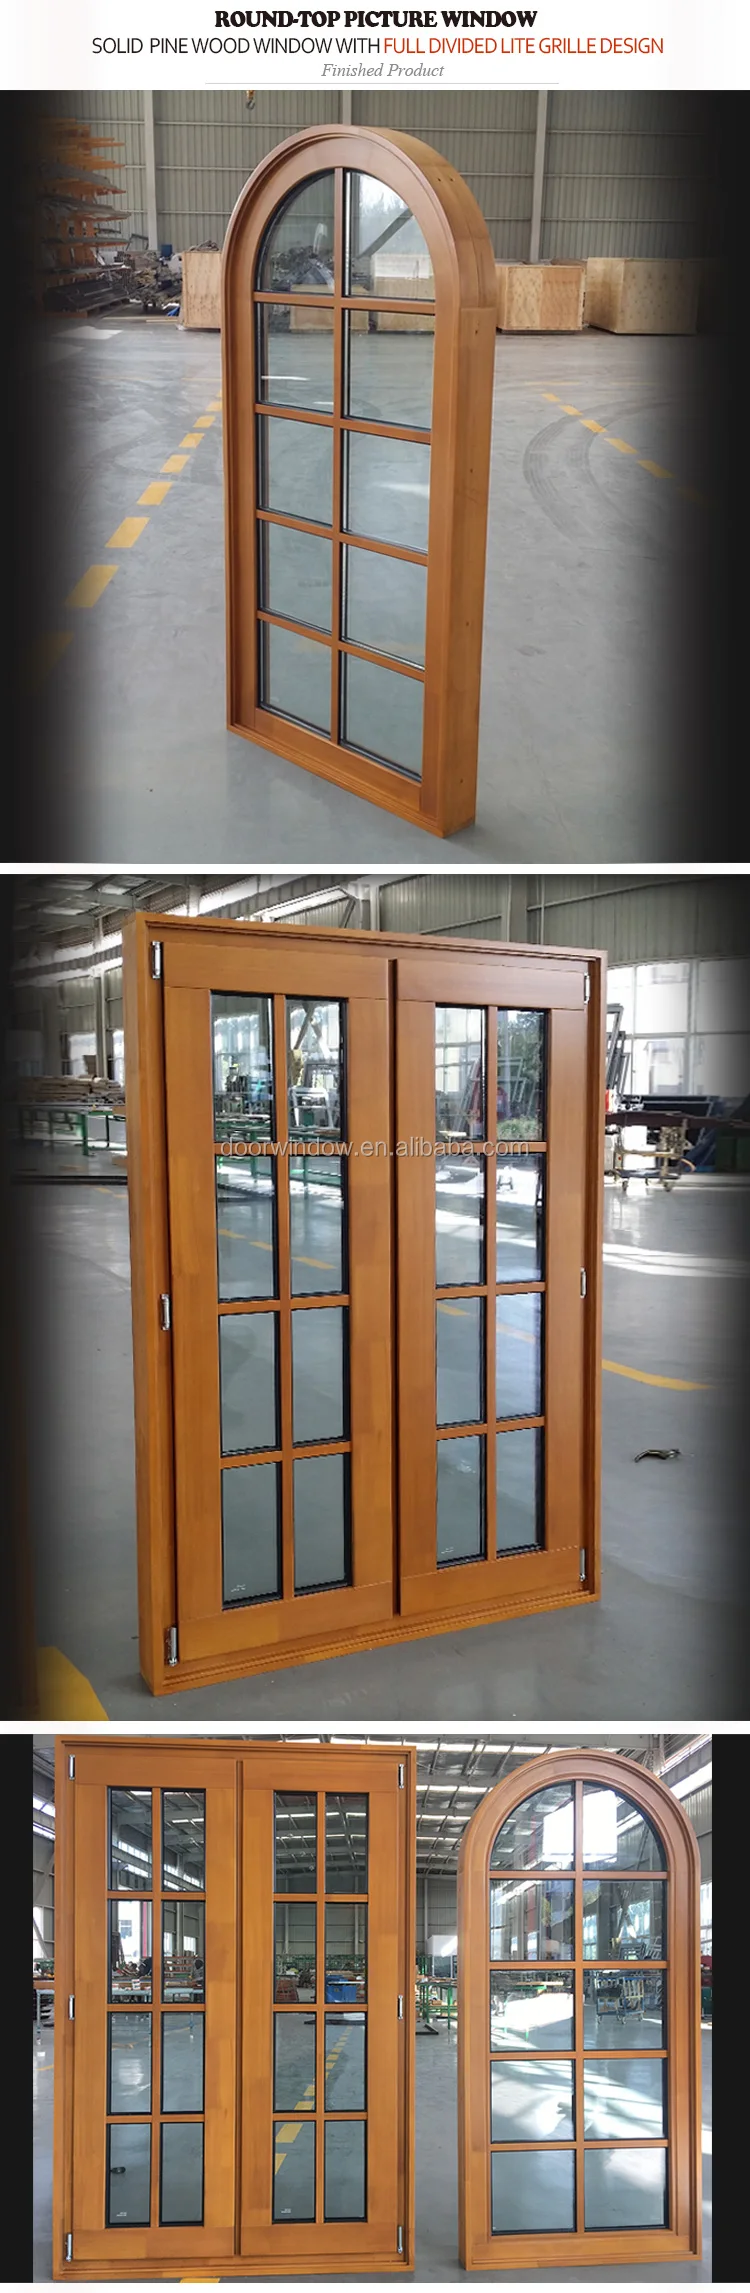 Super September Purchasing French casement window push price quality out windows double glazing awning